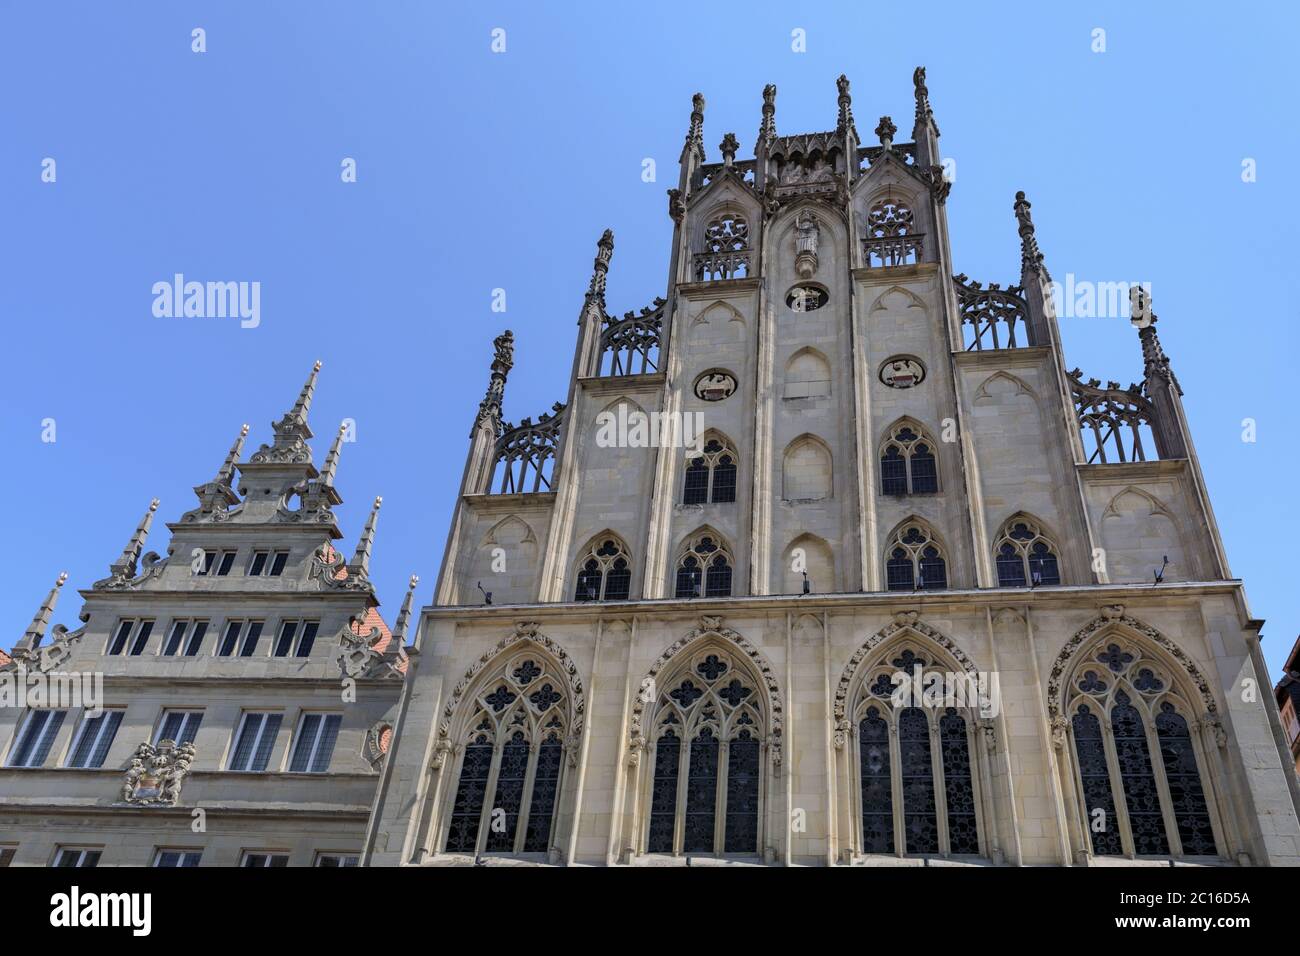 Münster historisches Rathaus, the historic city hall, gabled top, Münster, Germany Stock Photo